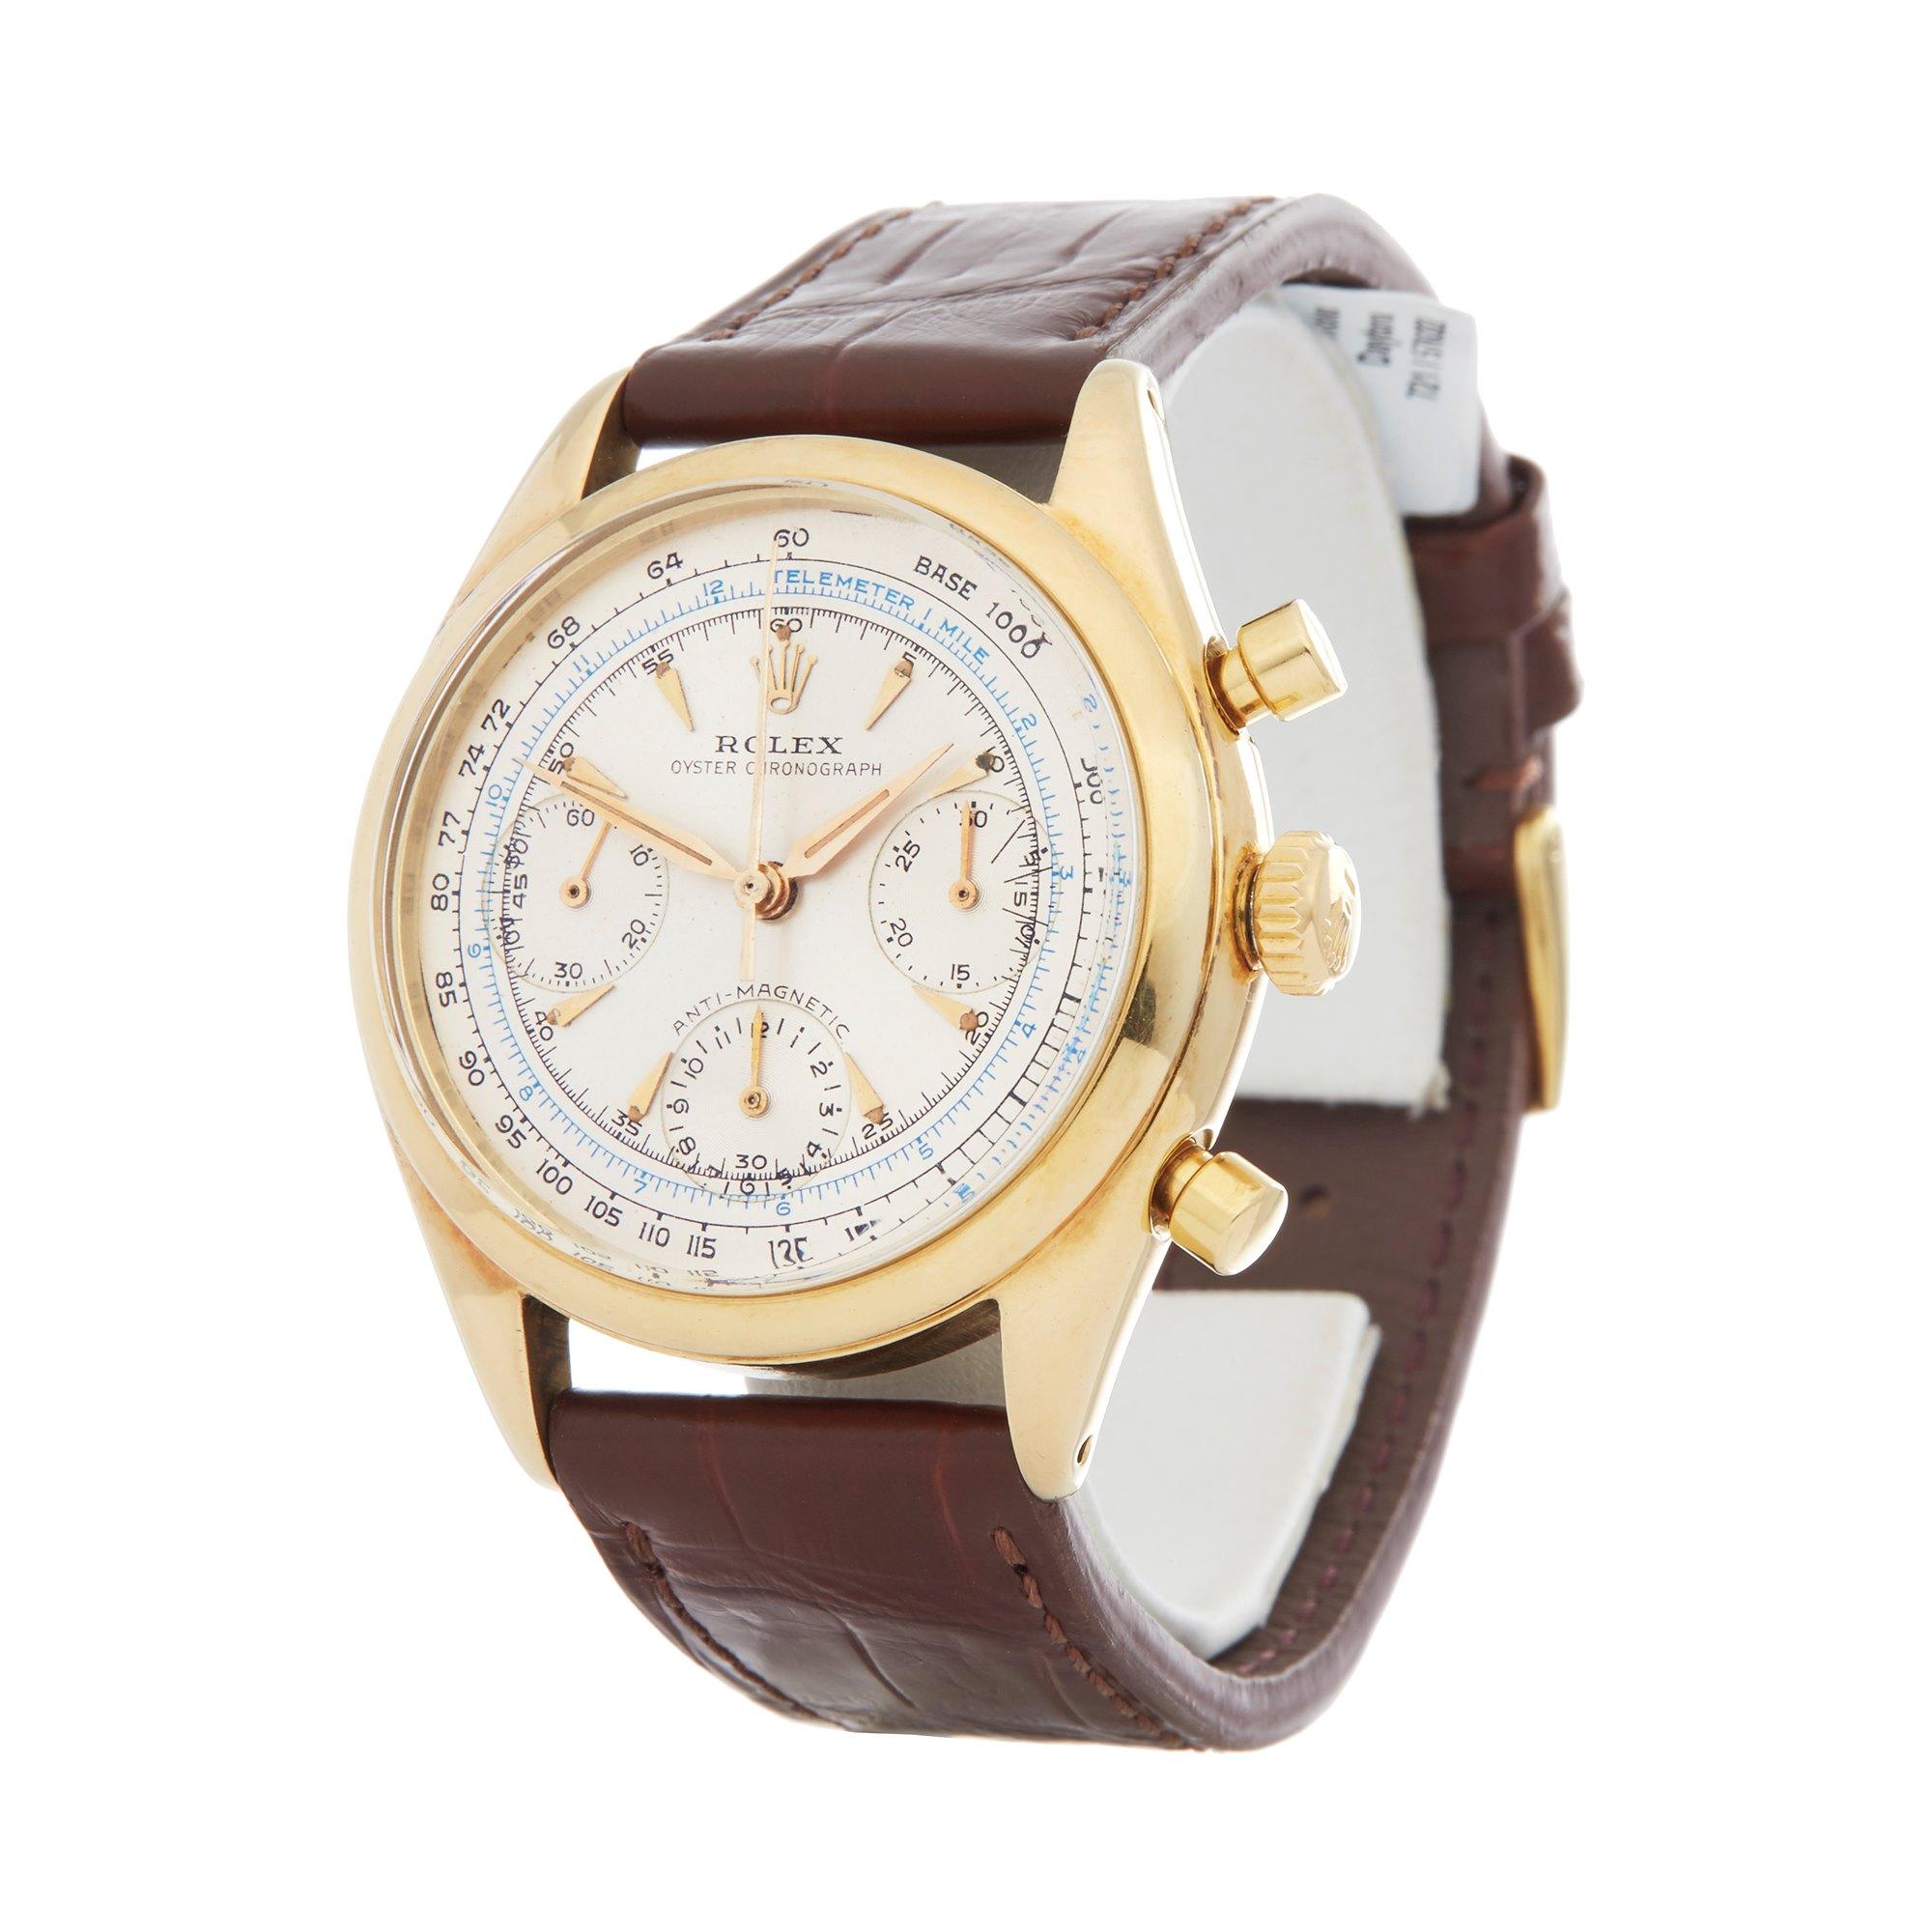 Xupes Reference: COM002422
Manufacturer: Rolex
Model: Daytona
Model Variant: 
Model Number: 6234
Age: Circa 1957
Gender: Men's
Complete With: Xupes Presentation Box 
Dial: Silver Baton
Glass: Plexiglass
Case Material: Yellow Gold
Strap Material: